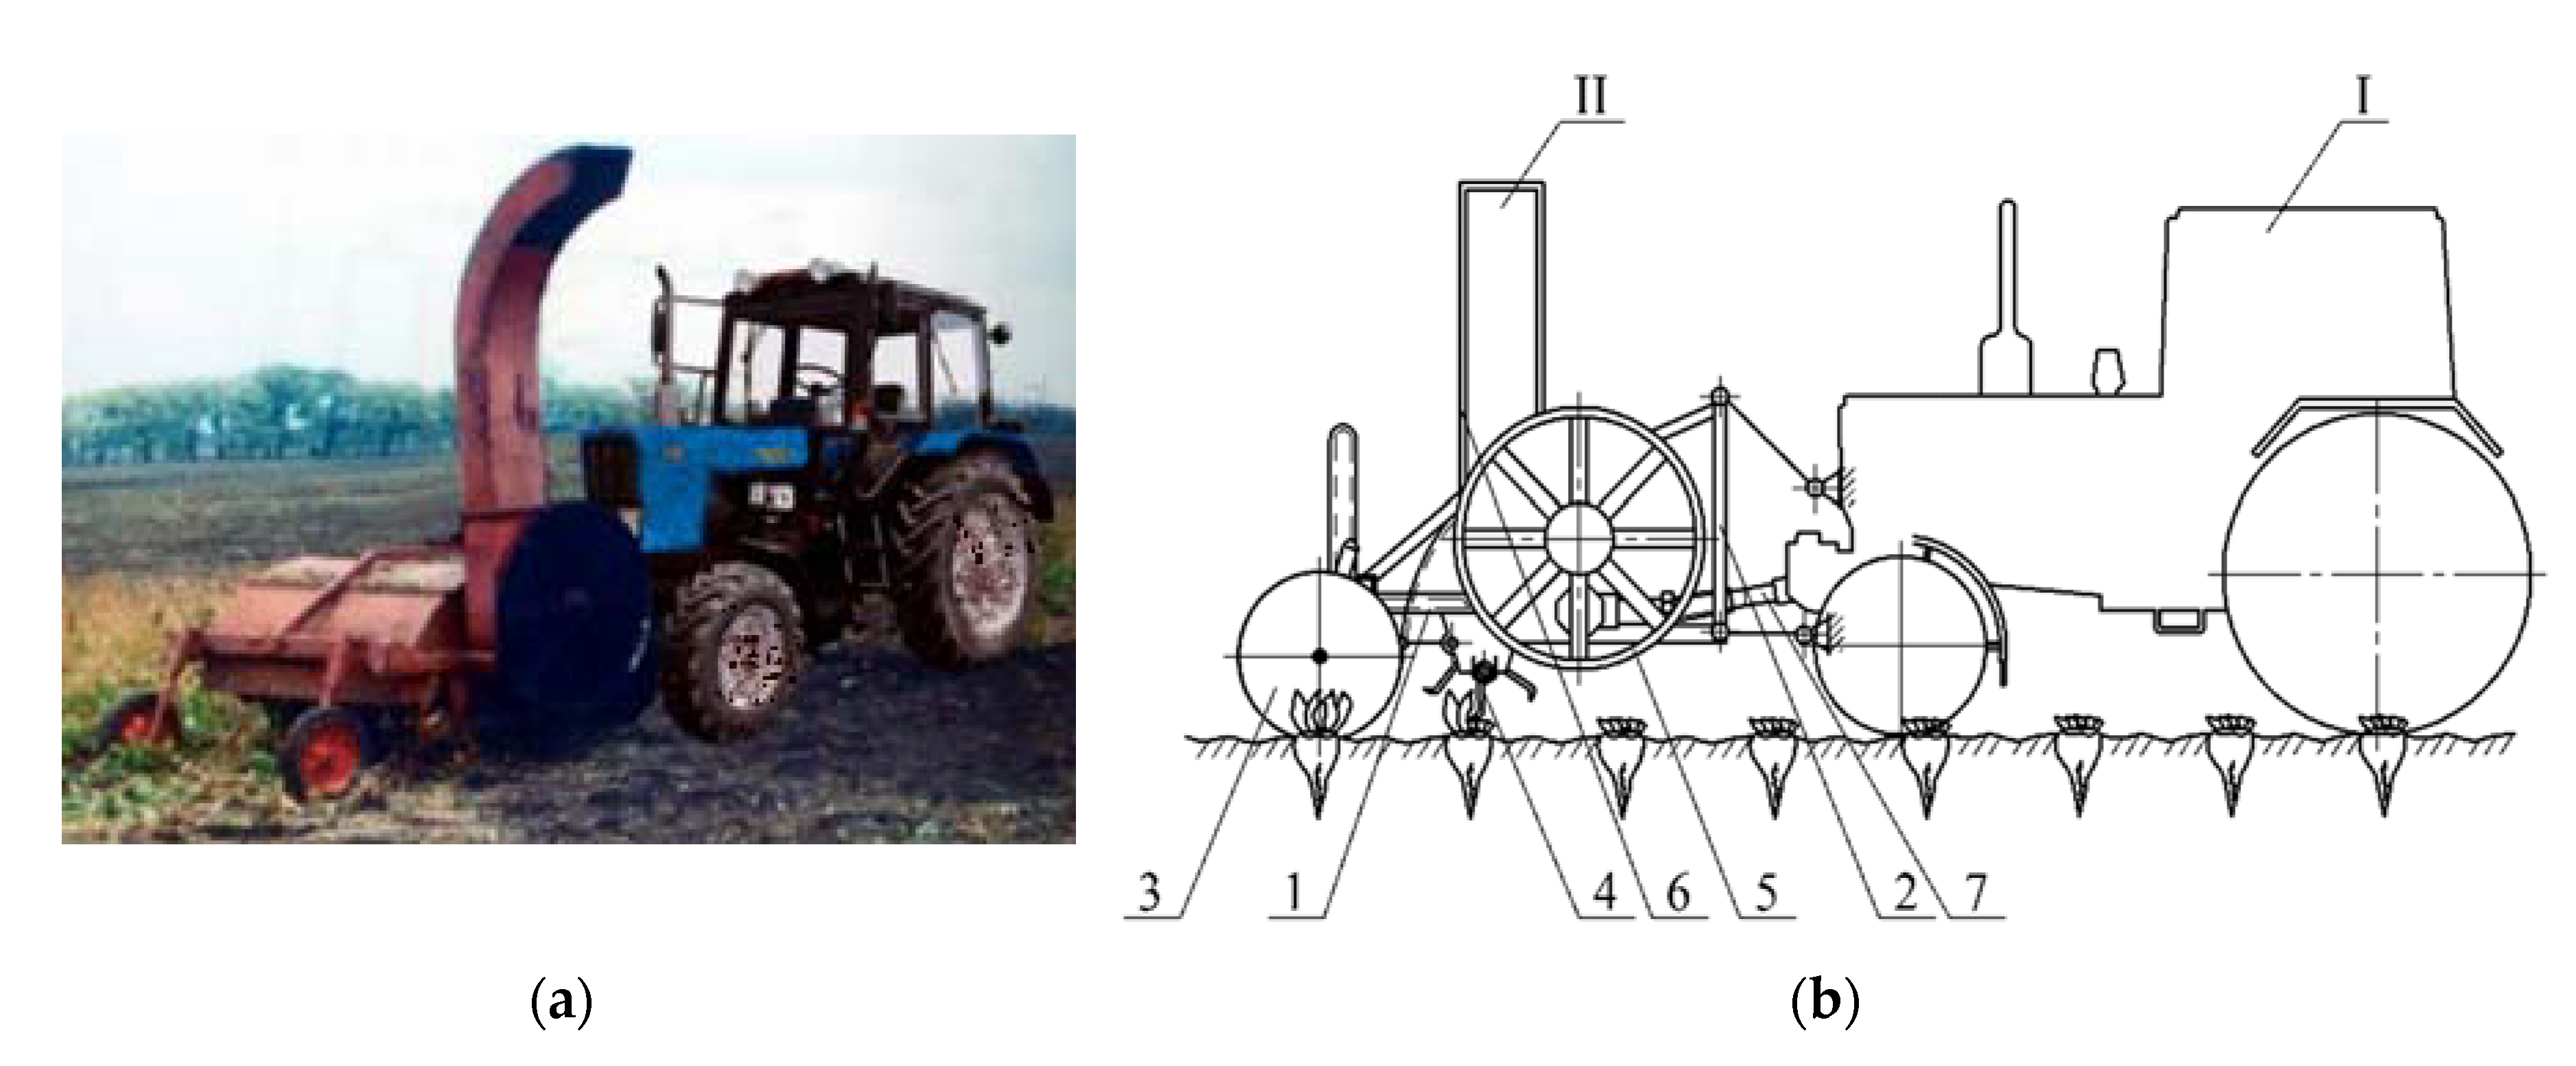 Energies | Free Full-Text | Performance Assessment of Front-Mounted Beet Machine for Biomass Harvesting